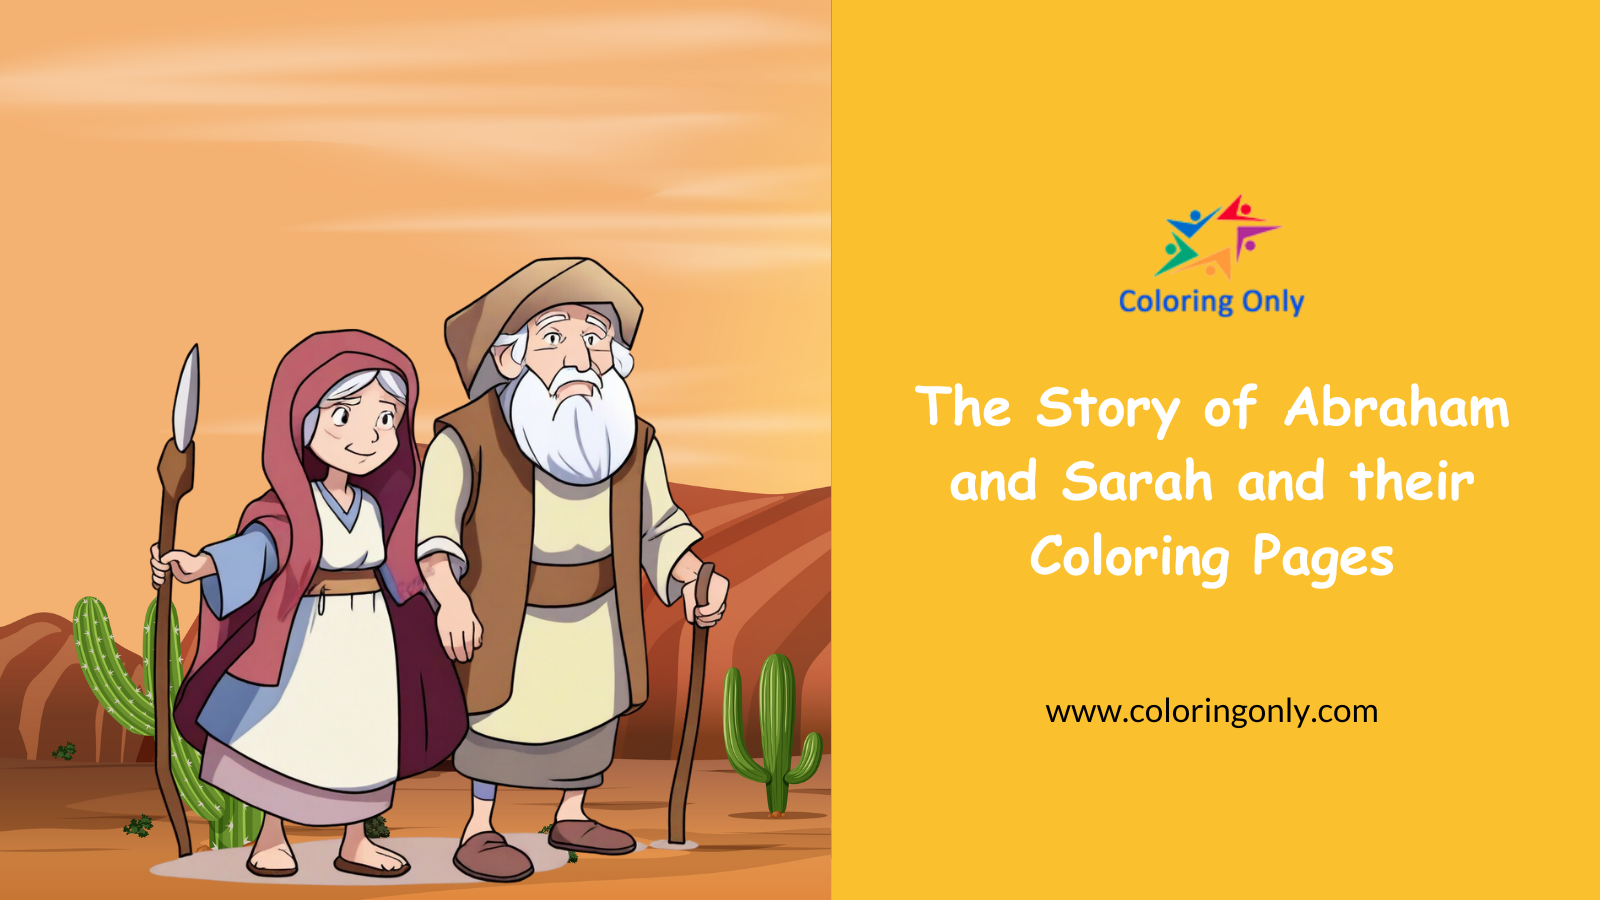 The Story of Abraham and Sarah and their Coloring Pages